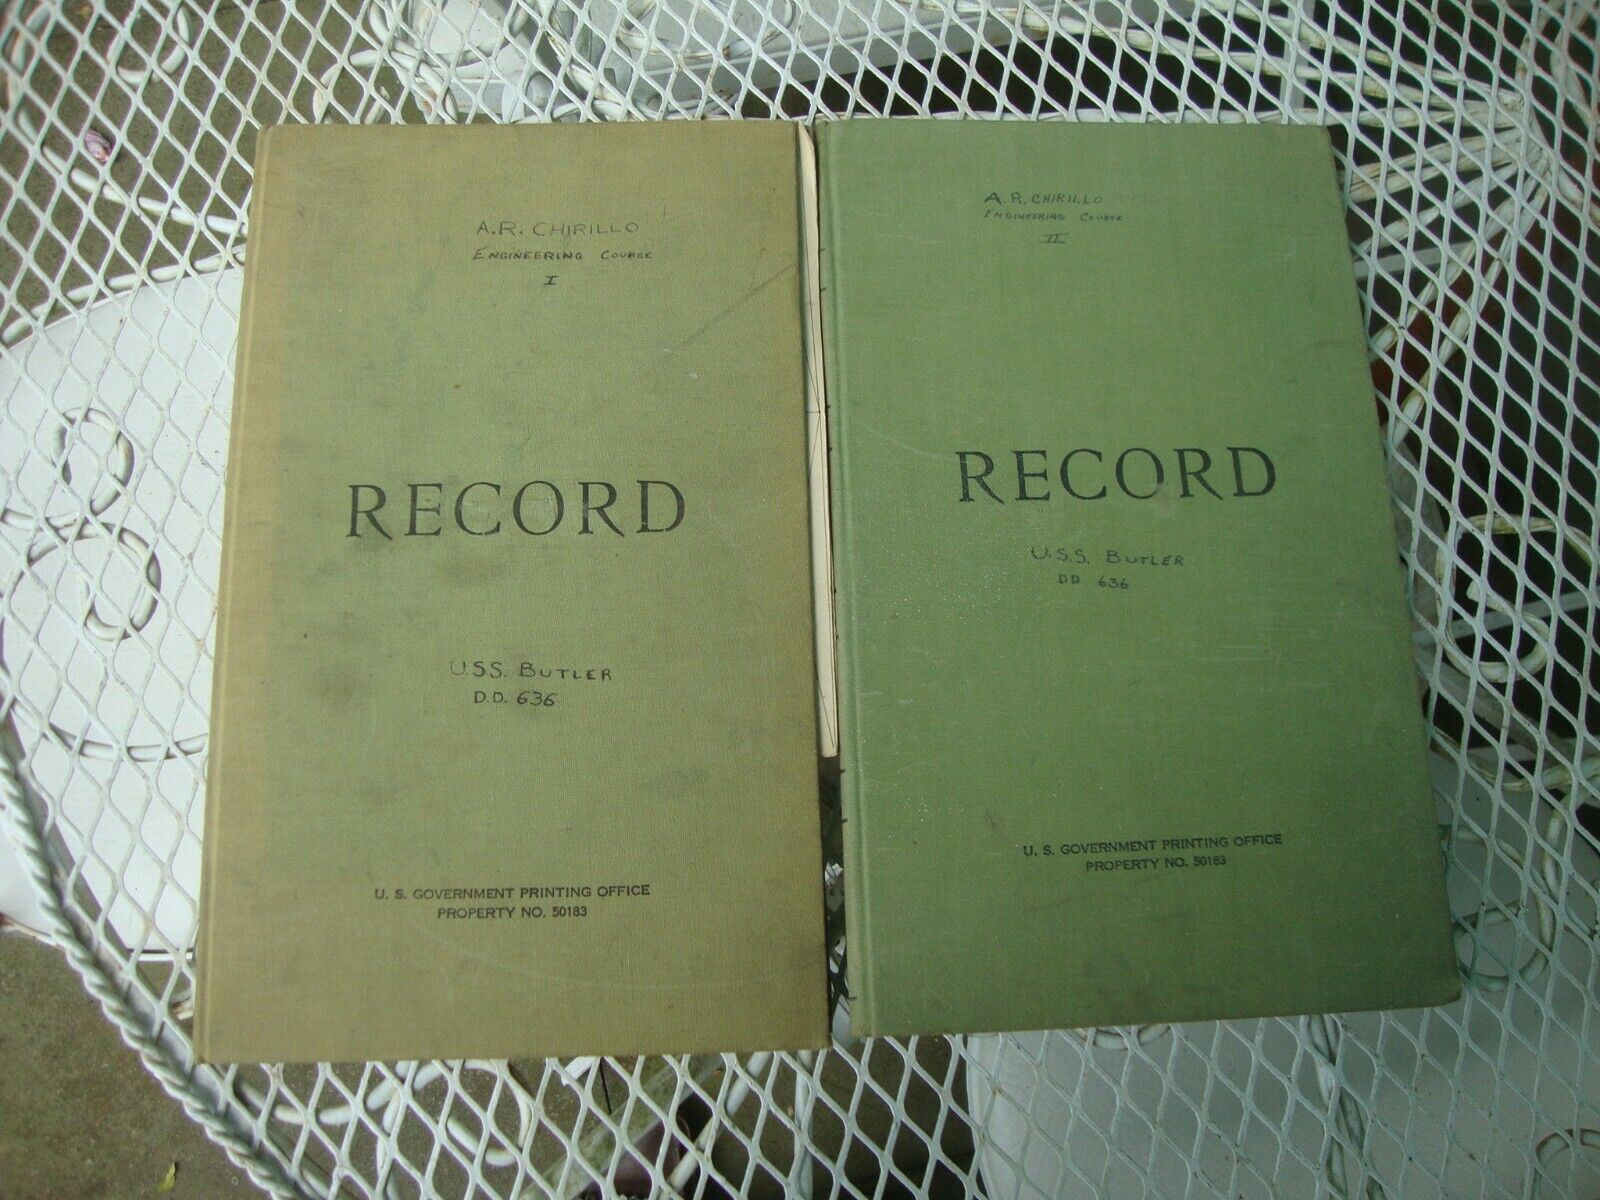 USS Butler DD 636 ENGINEERING COURSE RECORD BOOK by A.R. CHIRILLO ~1942-43